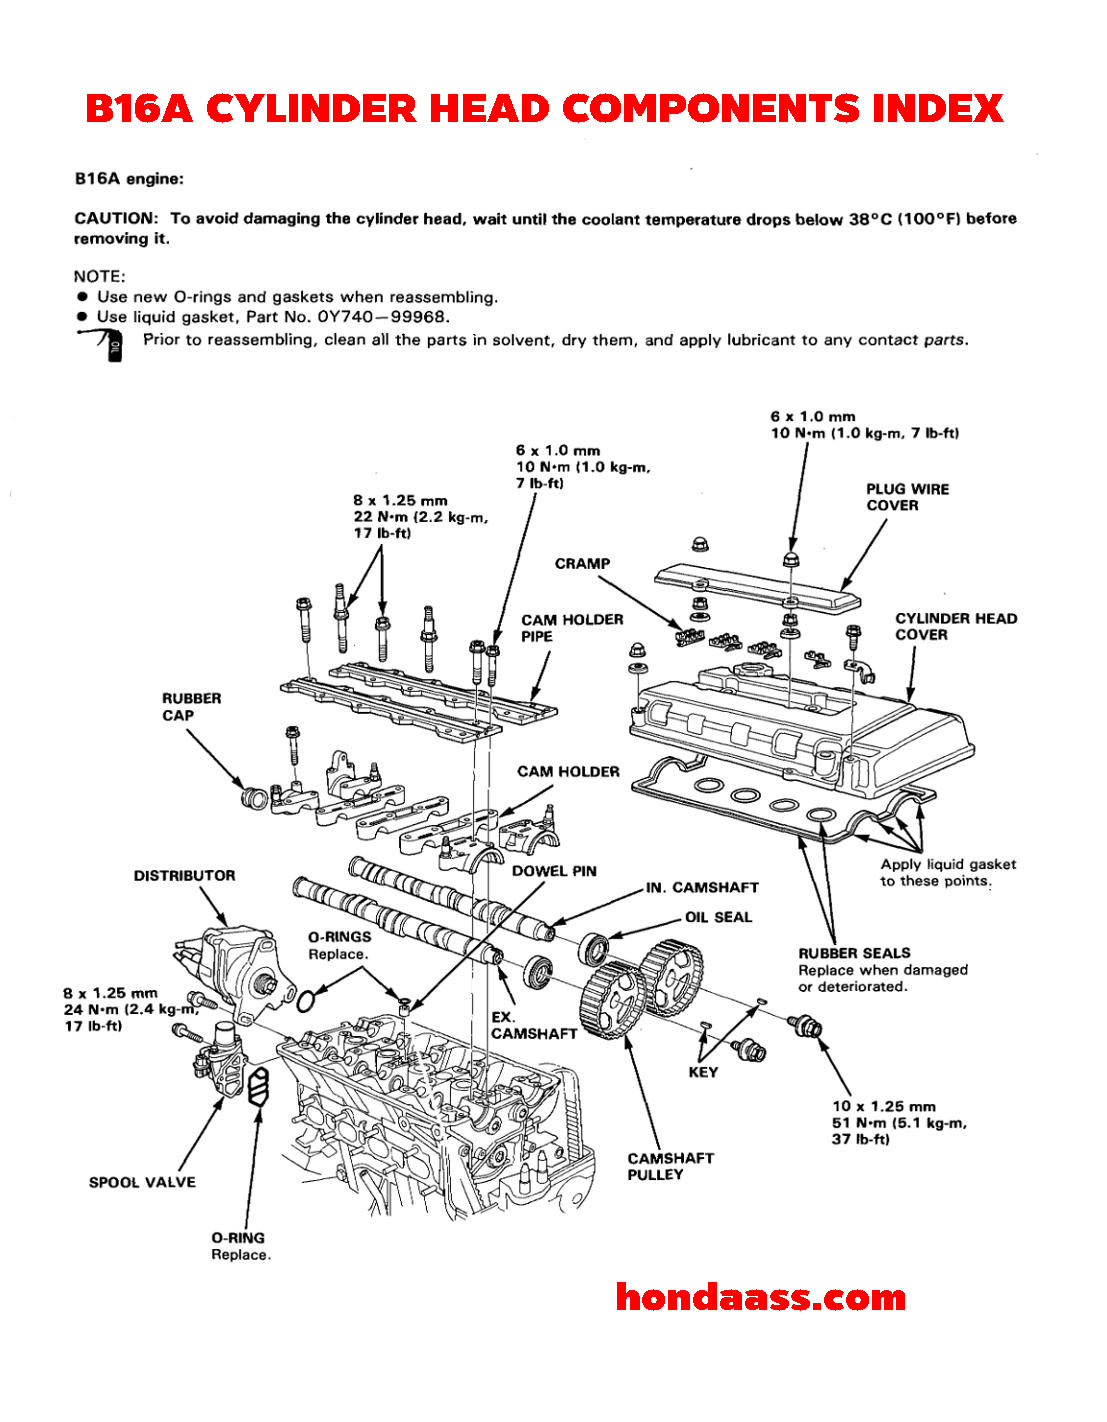 FREE DOWNLOAD DIY B20 VTEC BUILD GUIDE MANUAL B20 BLOCK WITH B16A HEAD  HIGH COMPRESSION PISTONS